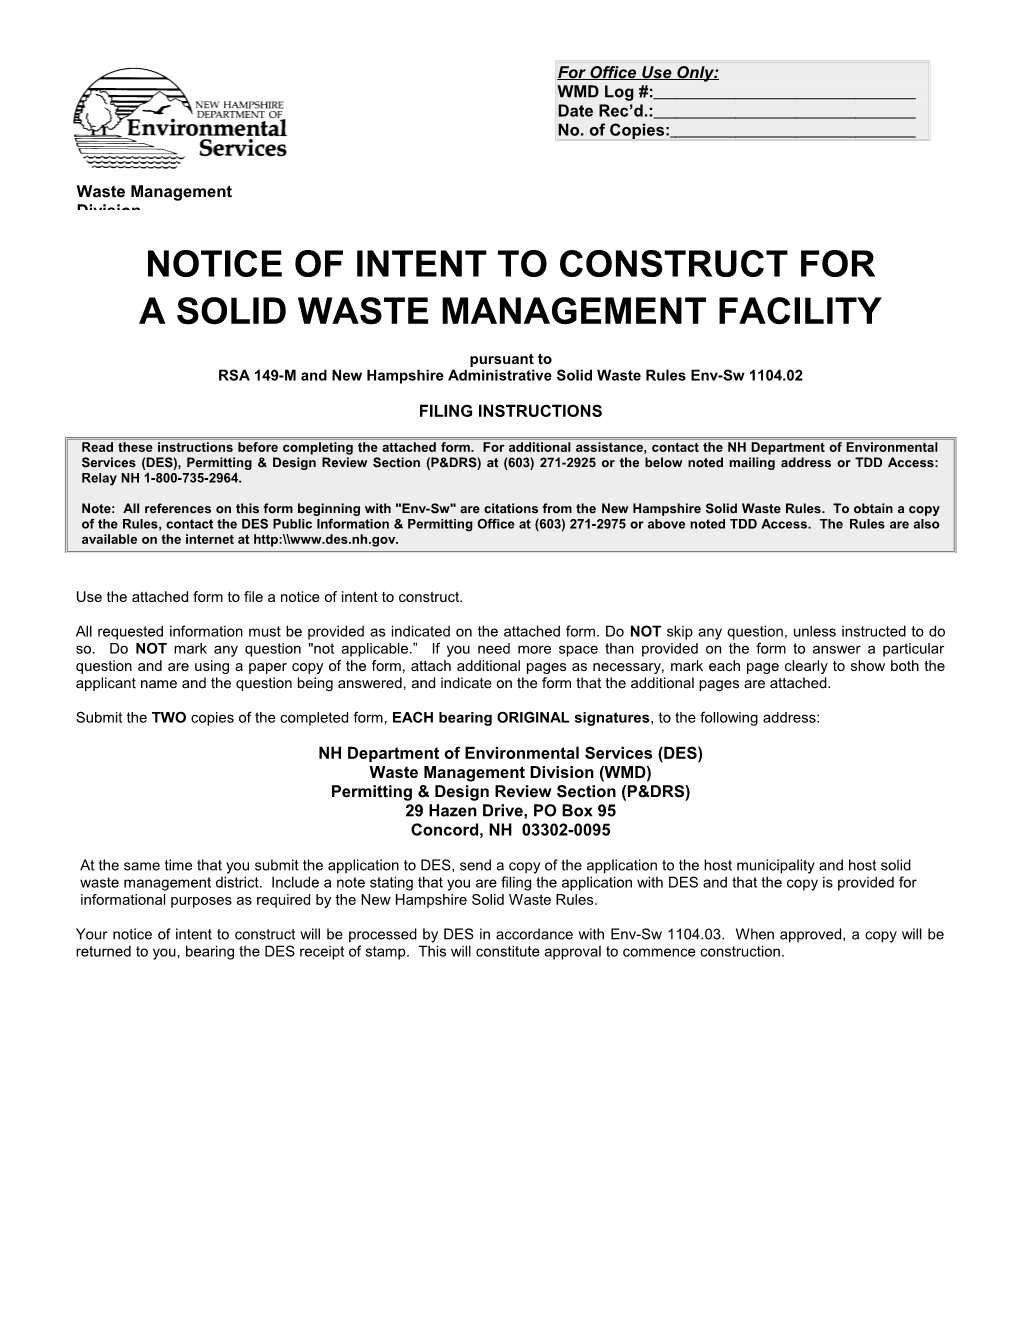 Notice of Intent to Construct For